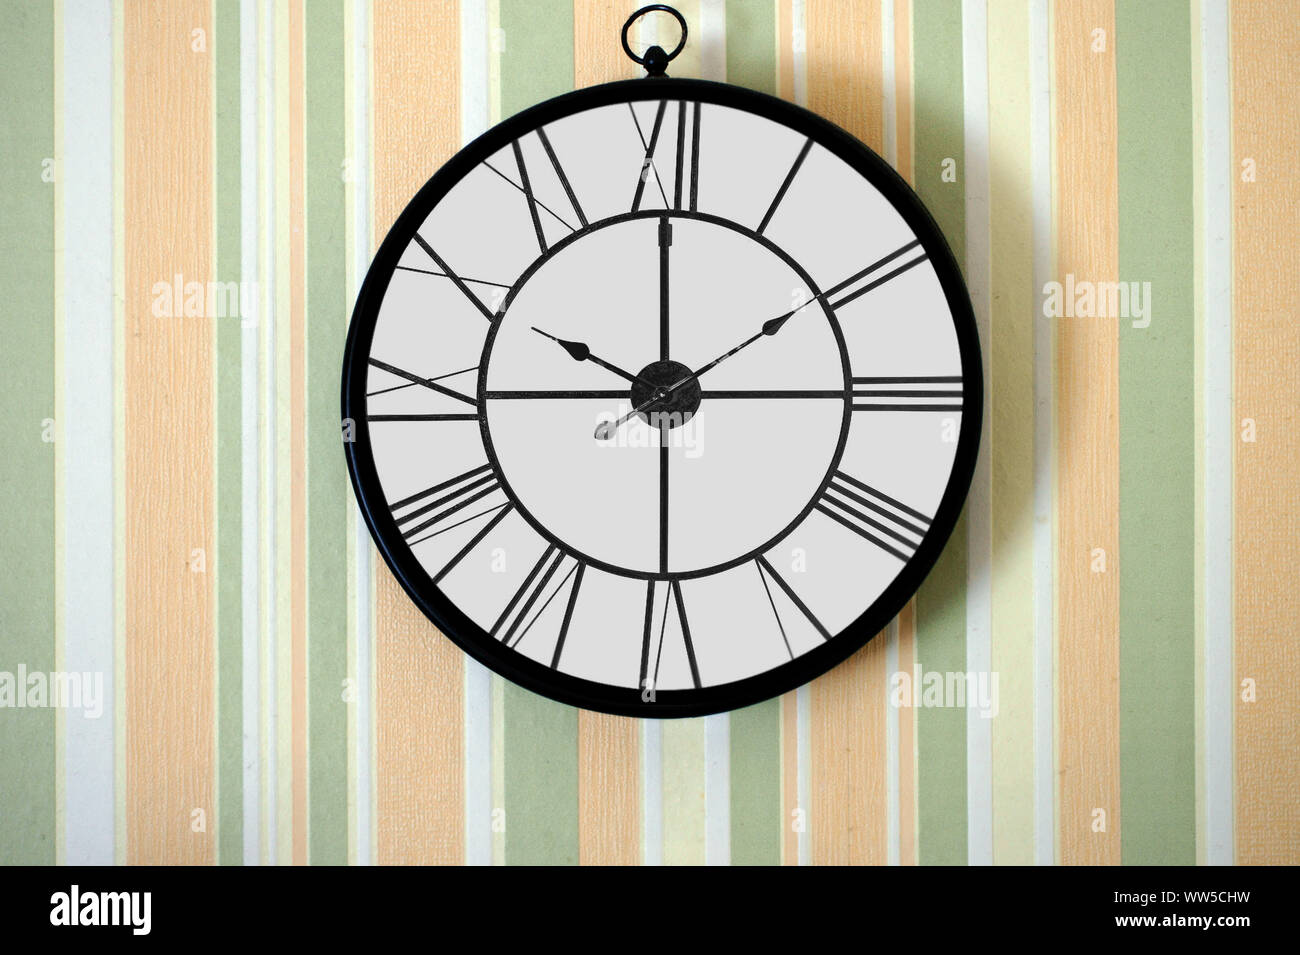 Close-up of a wall clock in front of a strikingly striped wallpaper, Stock Photo